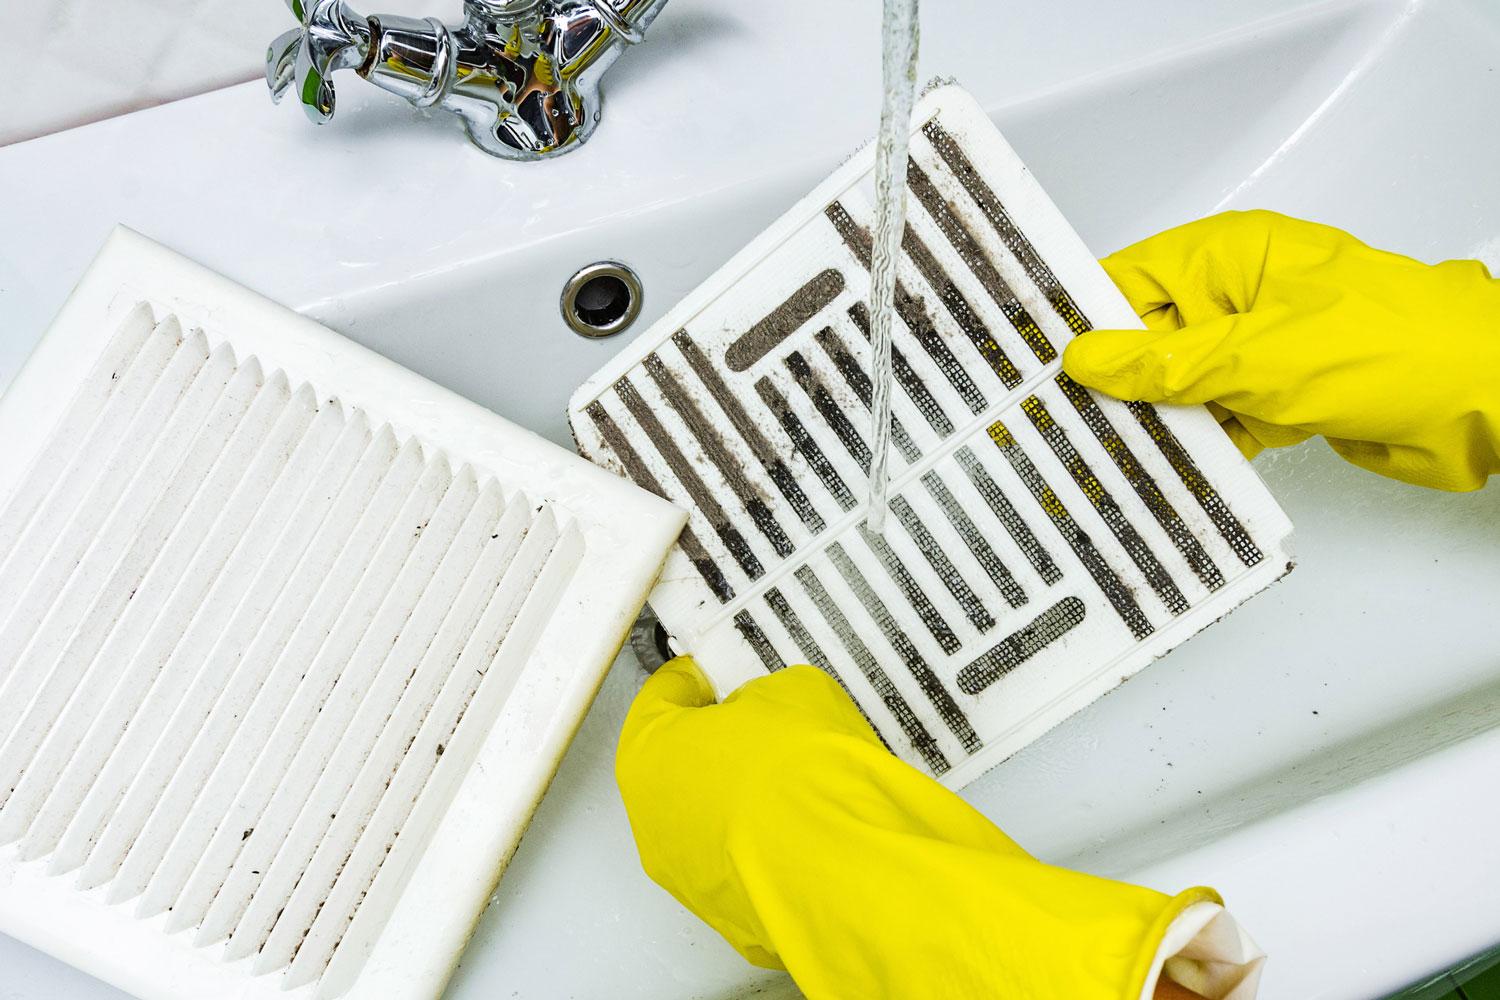 Person in a protective rubber glove washes in the sink air filter of the ventilation return duct blocked by dust and debris